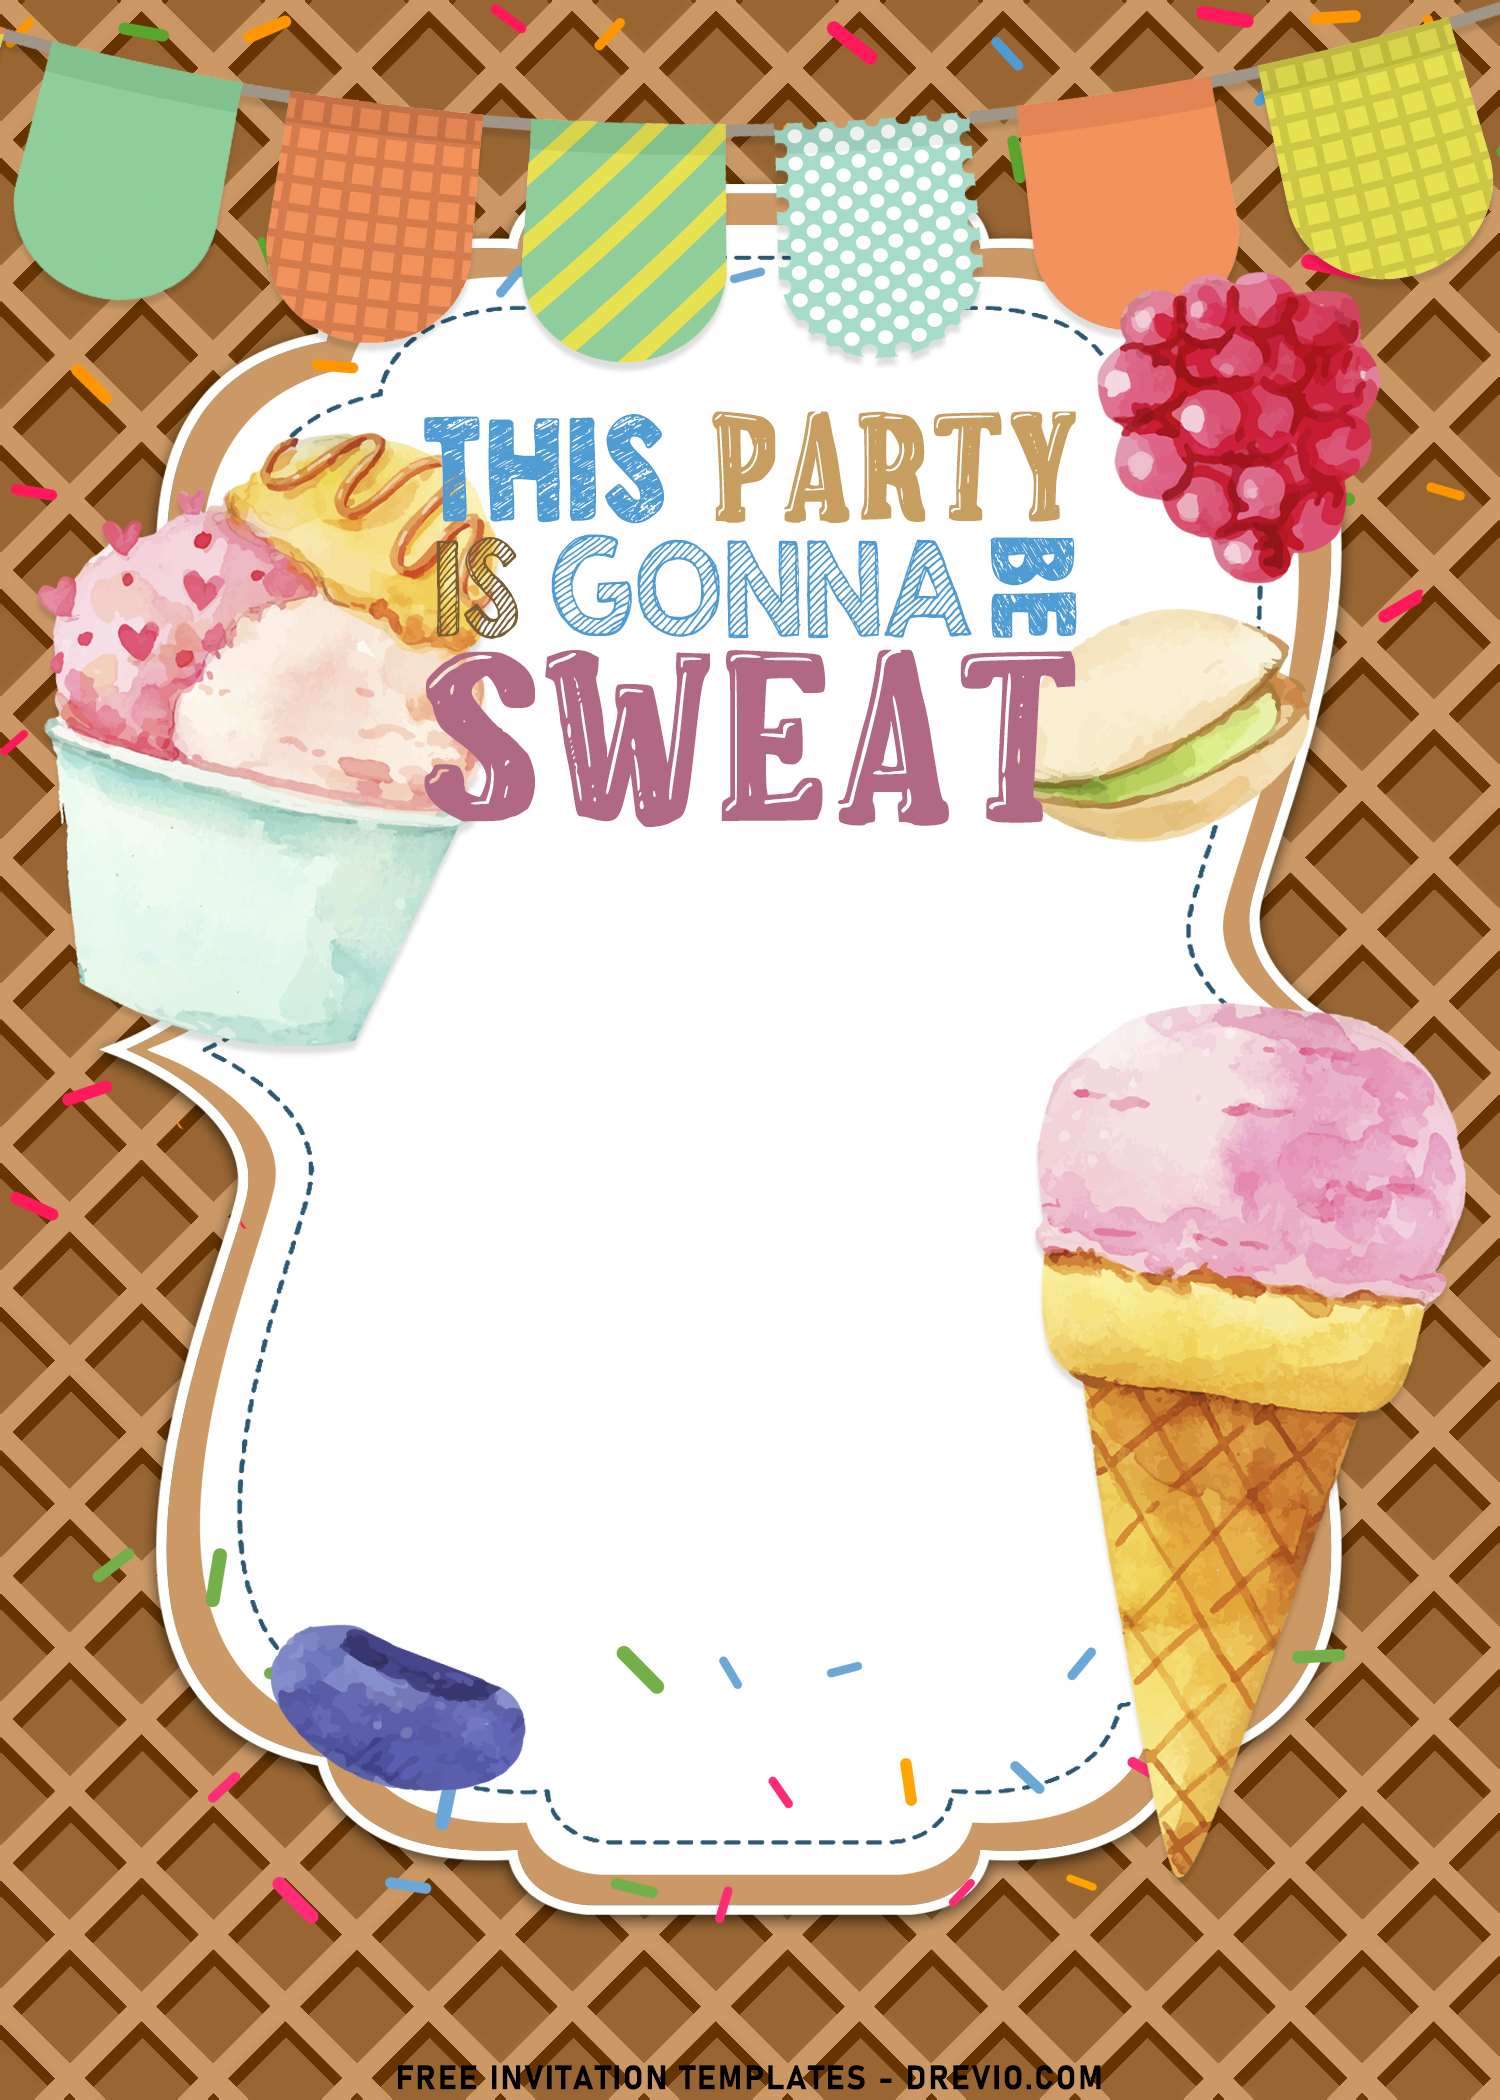 10 Ice Cream Party Invitation Templates For Kids Birthday Download